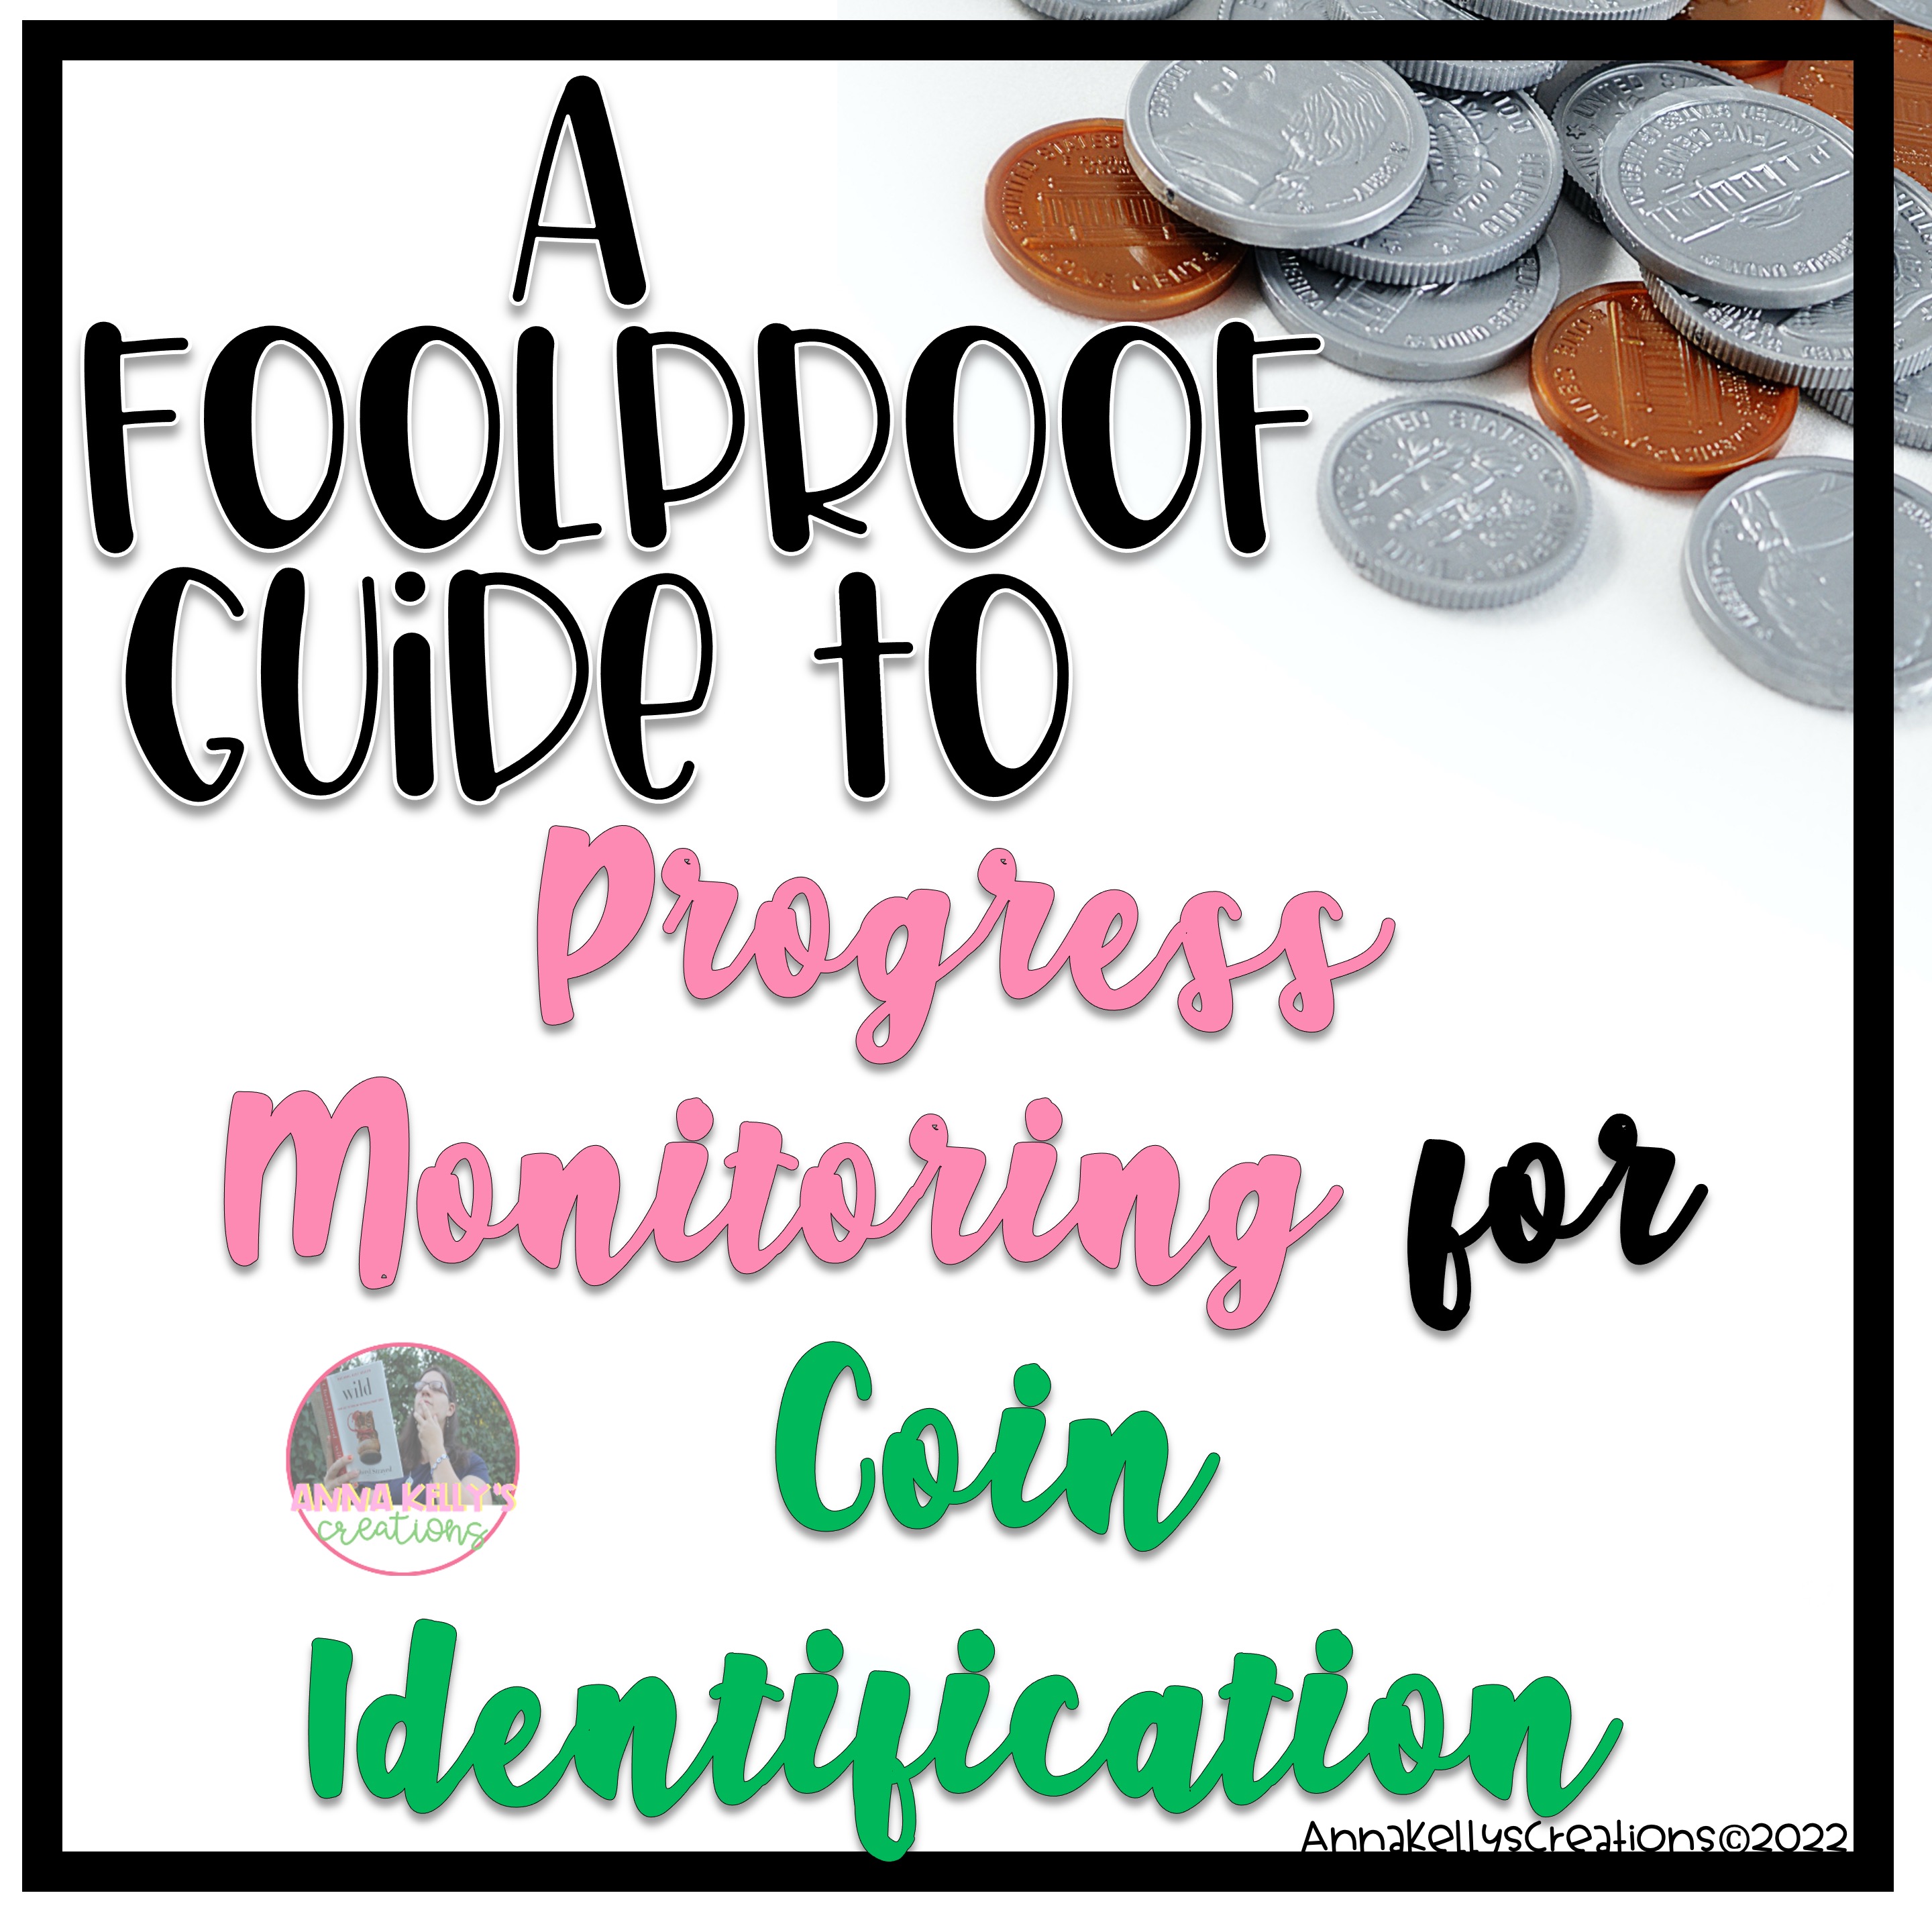 Read more about the article A Foolproof guide to Intervention and Progress Monitoring with Coin Identification